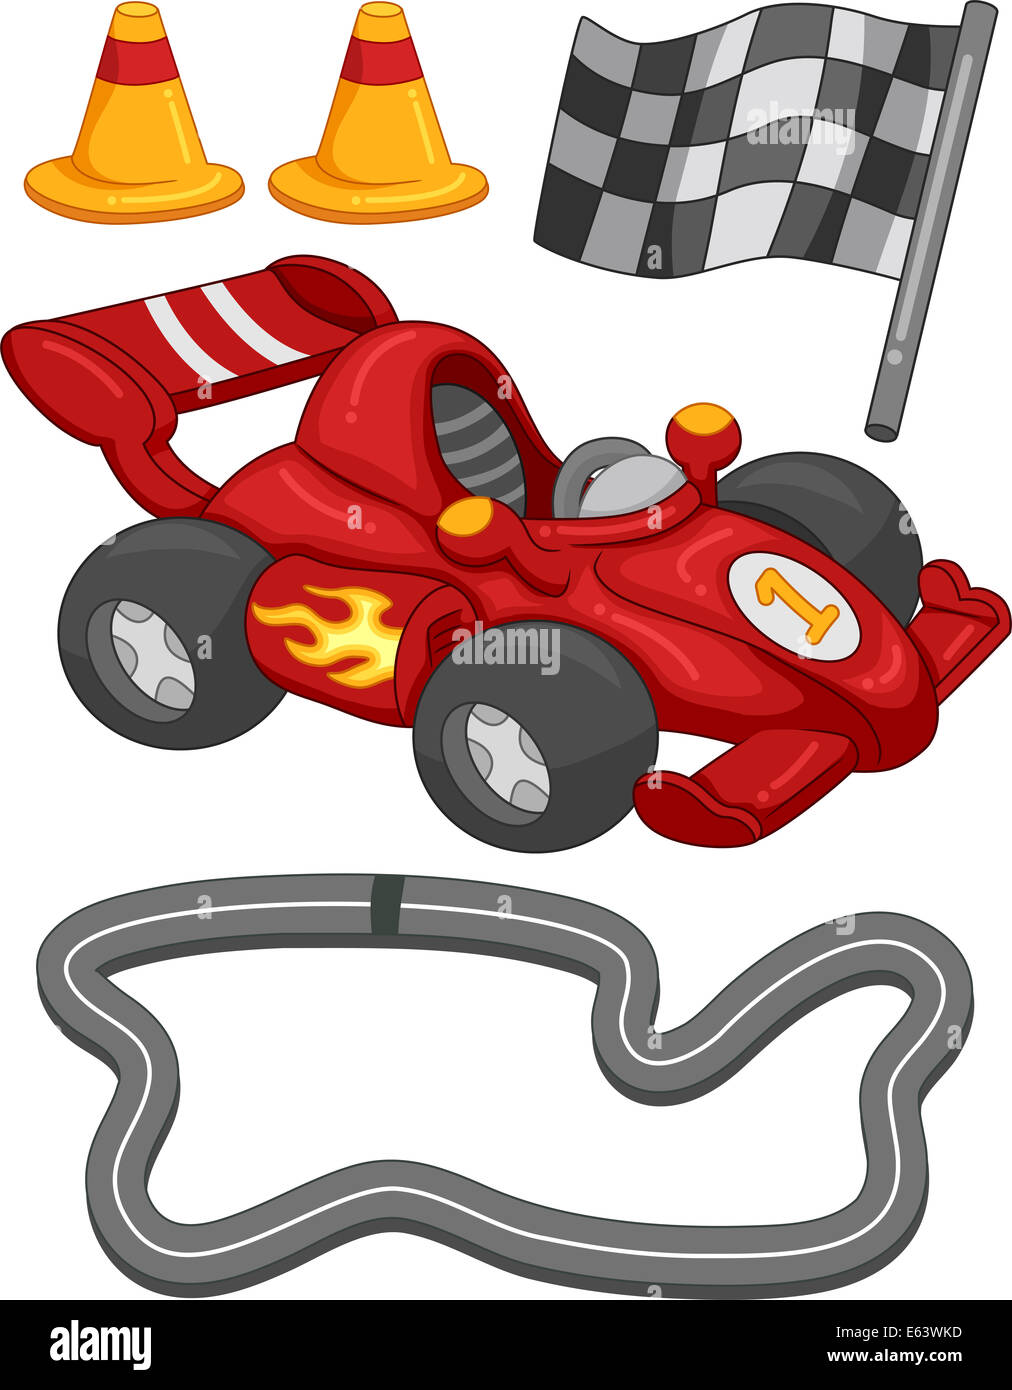 Illustration Featuring Different Race Car Elements Stock Photo